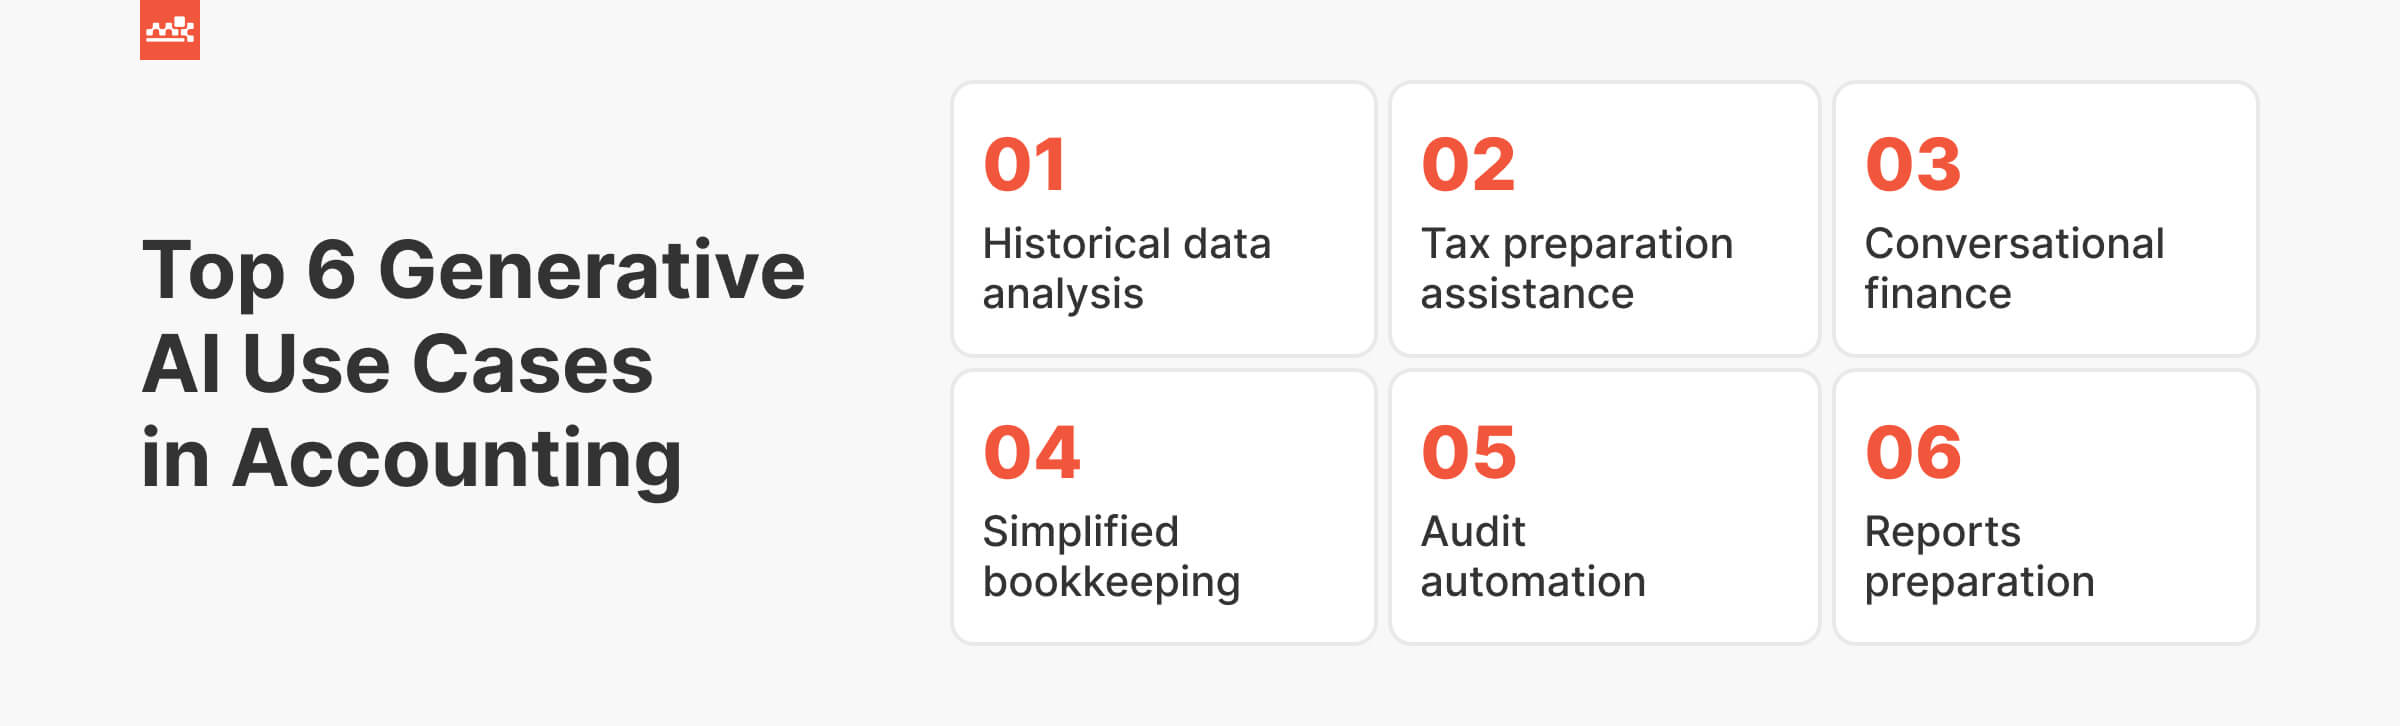 Top 6 Generative AI Use Cases in Accounting